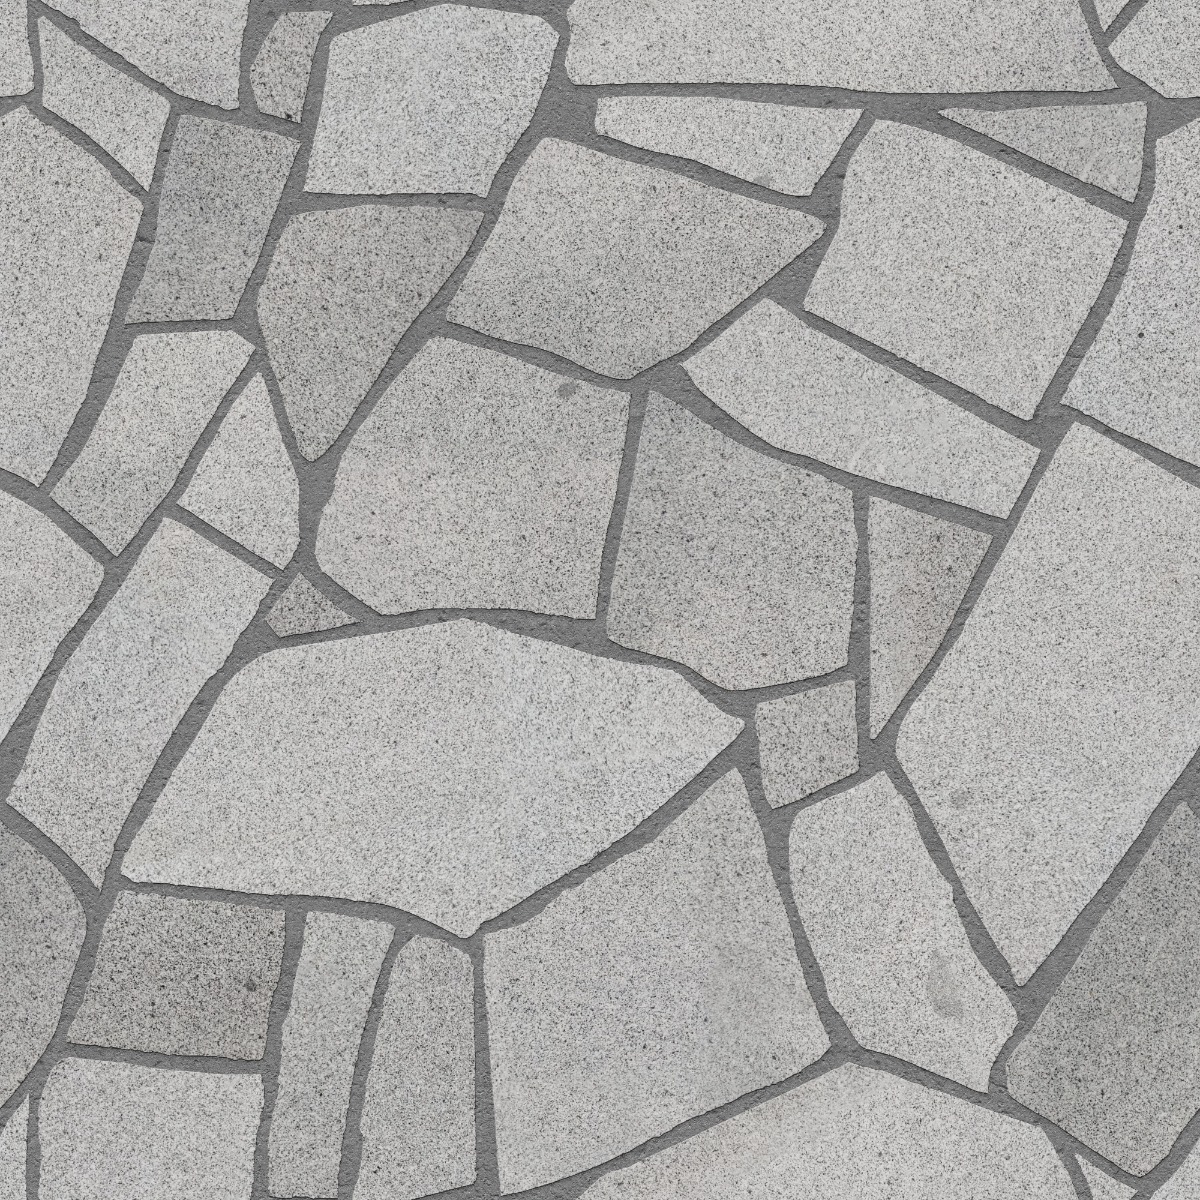 A seamless stone texture with granite blocks arranged in a Crazy Paving pattern